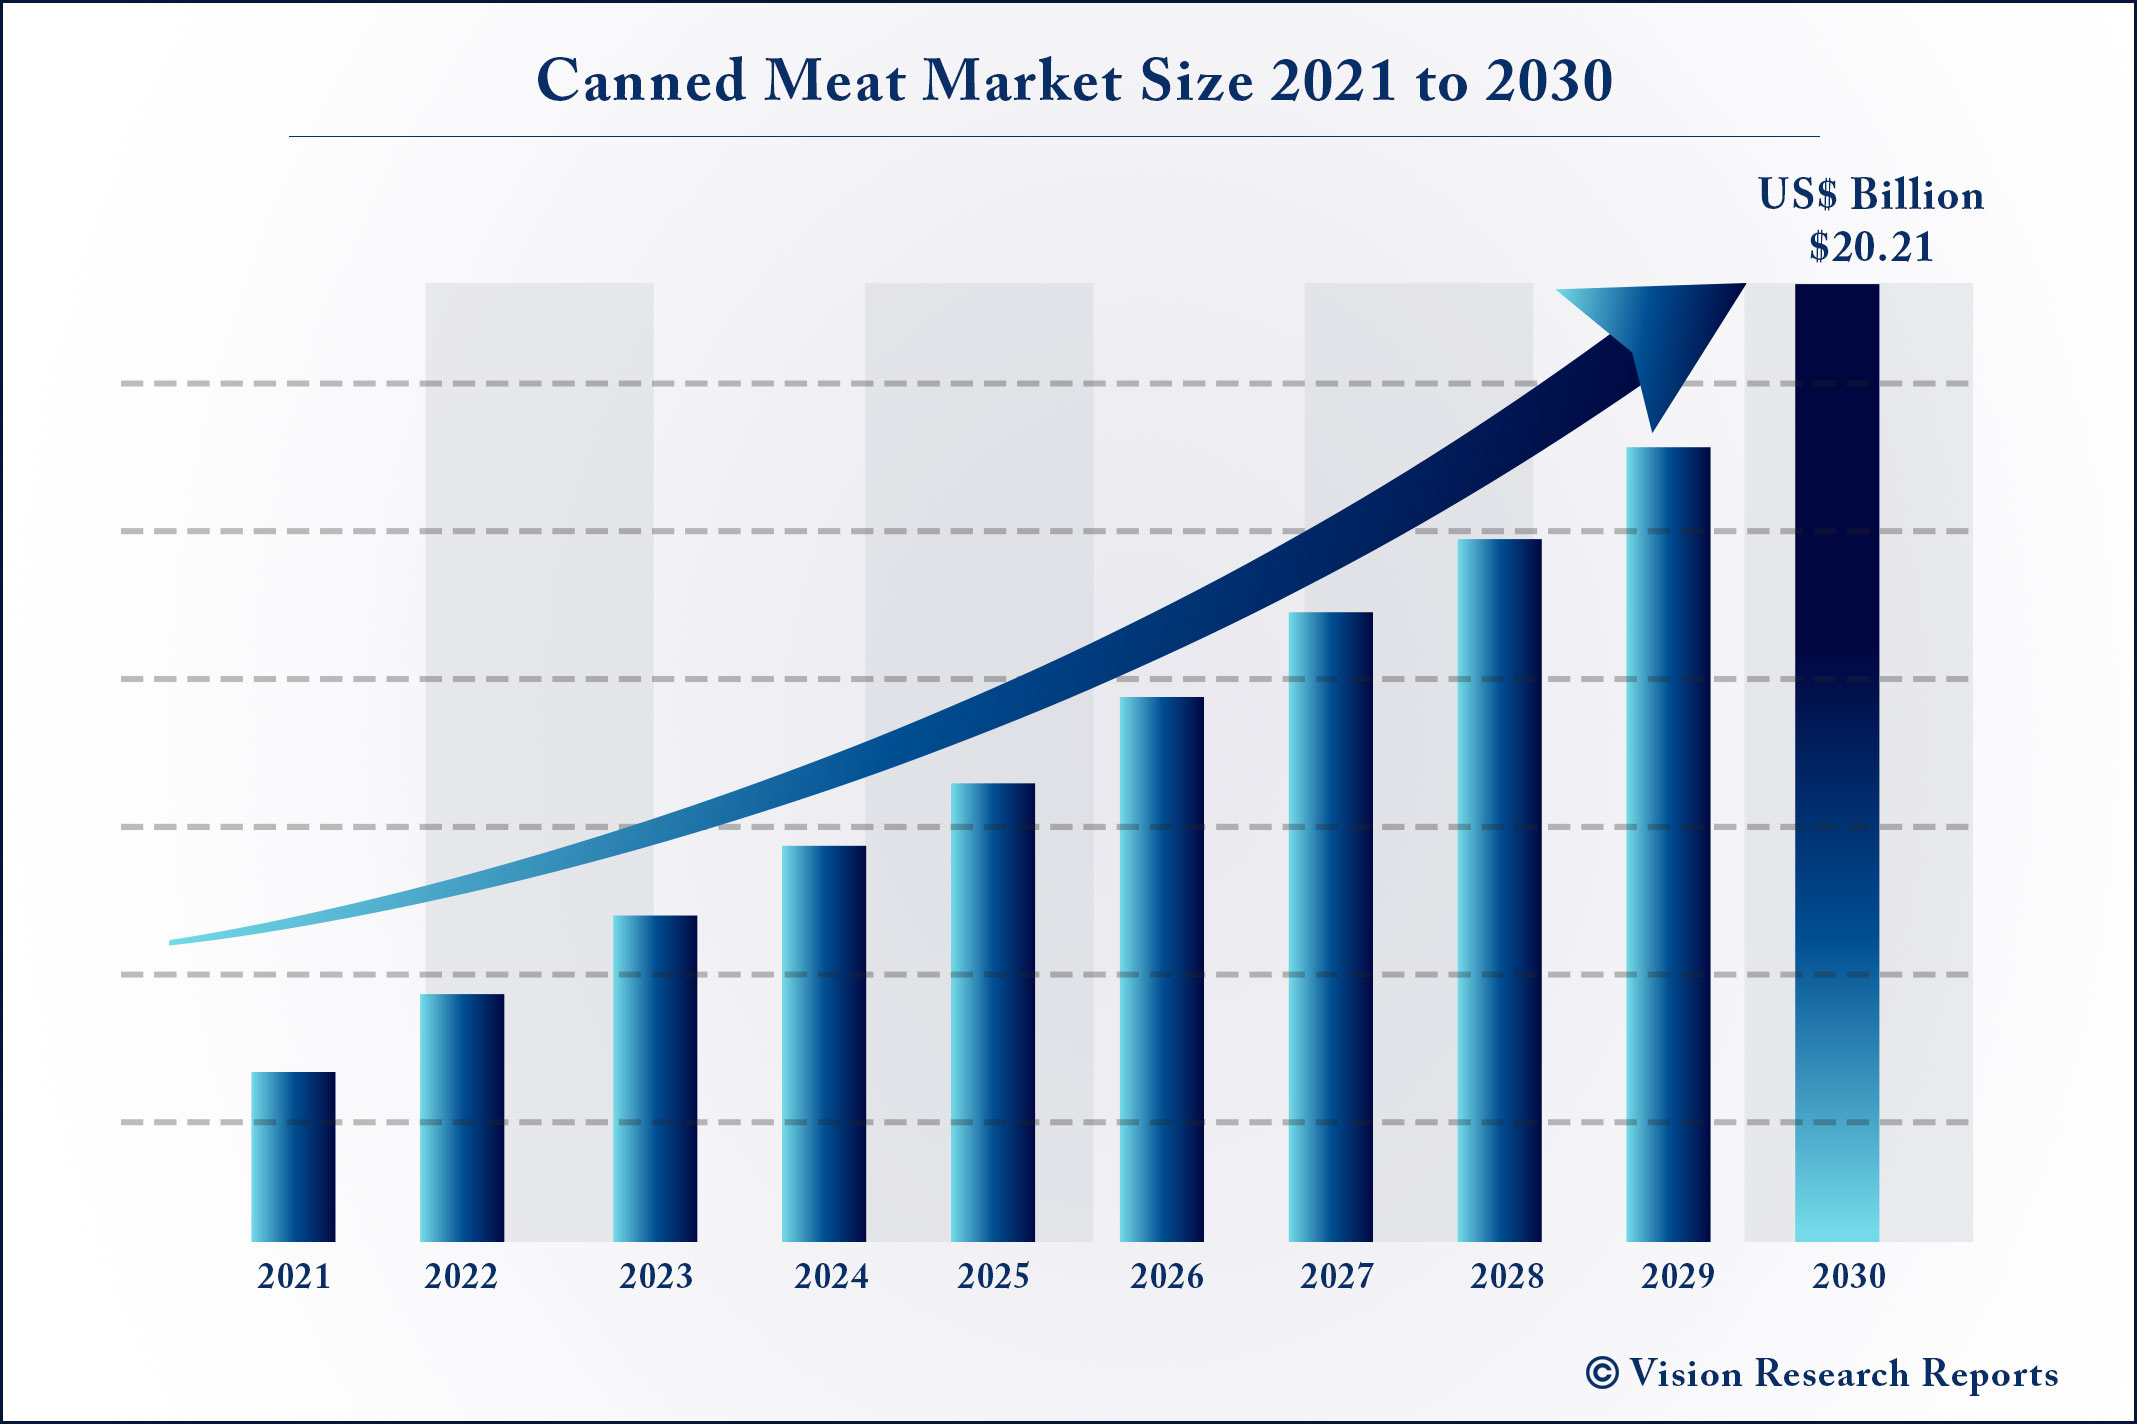 Canned Meat Market Size 2021 to 2030